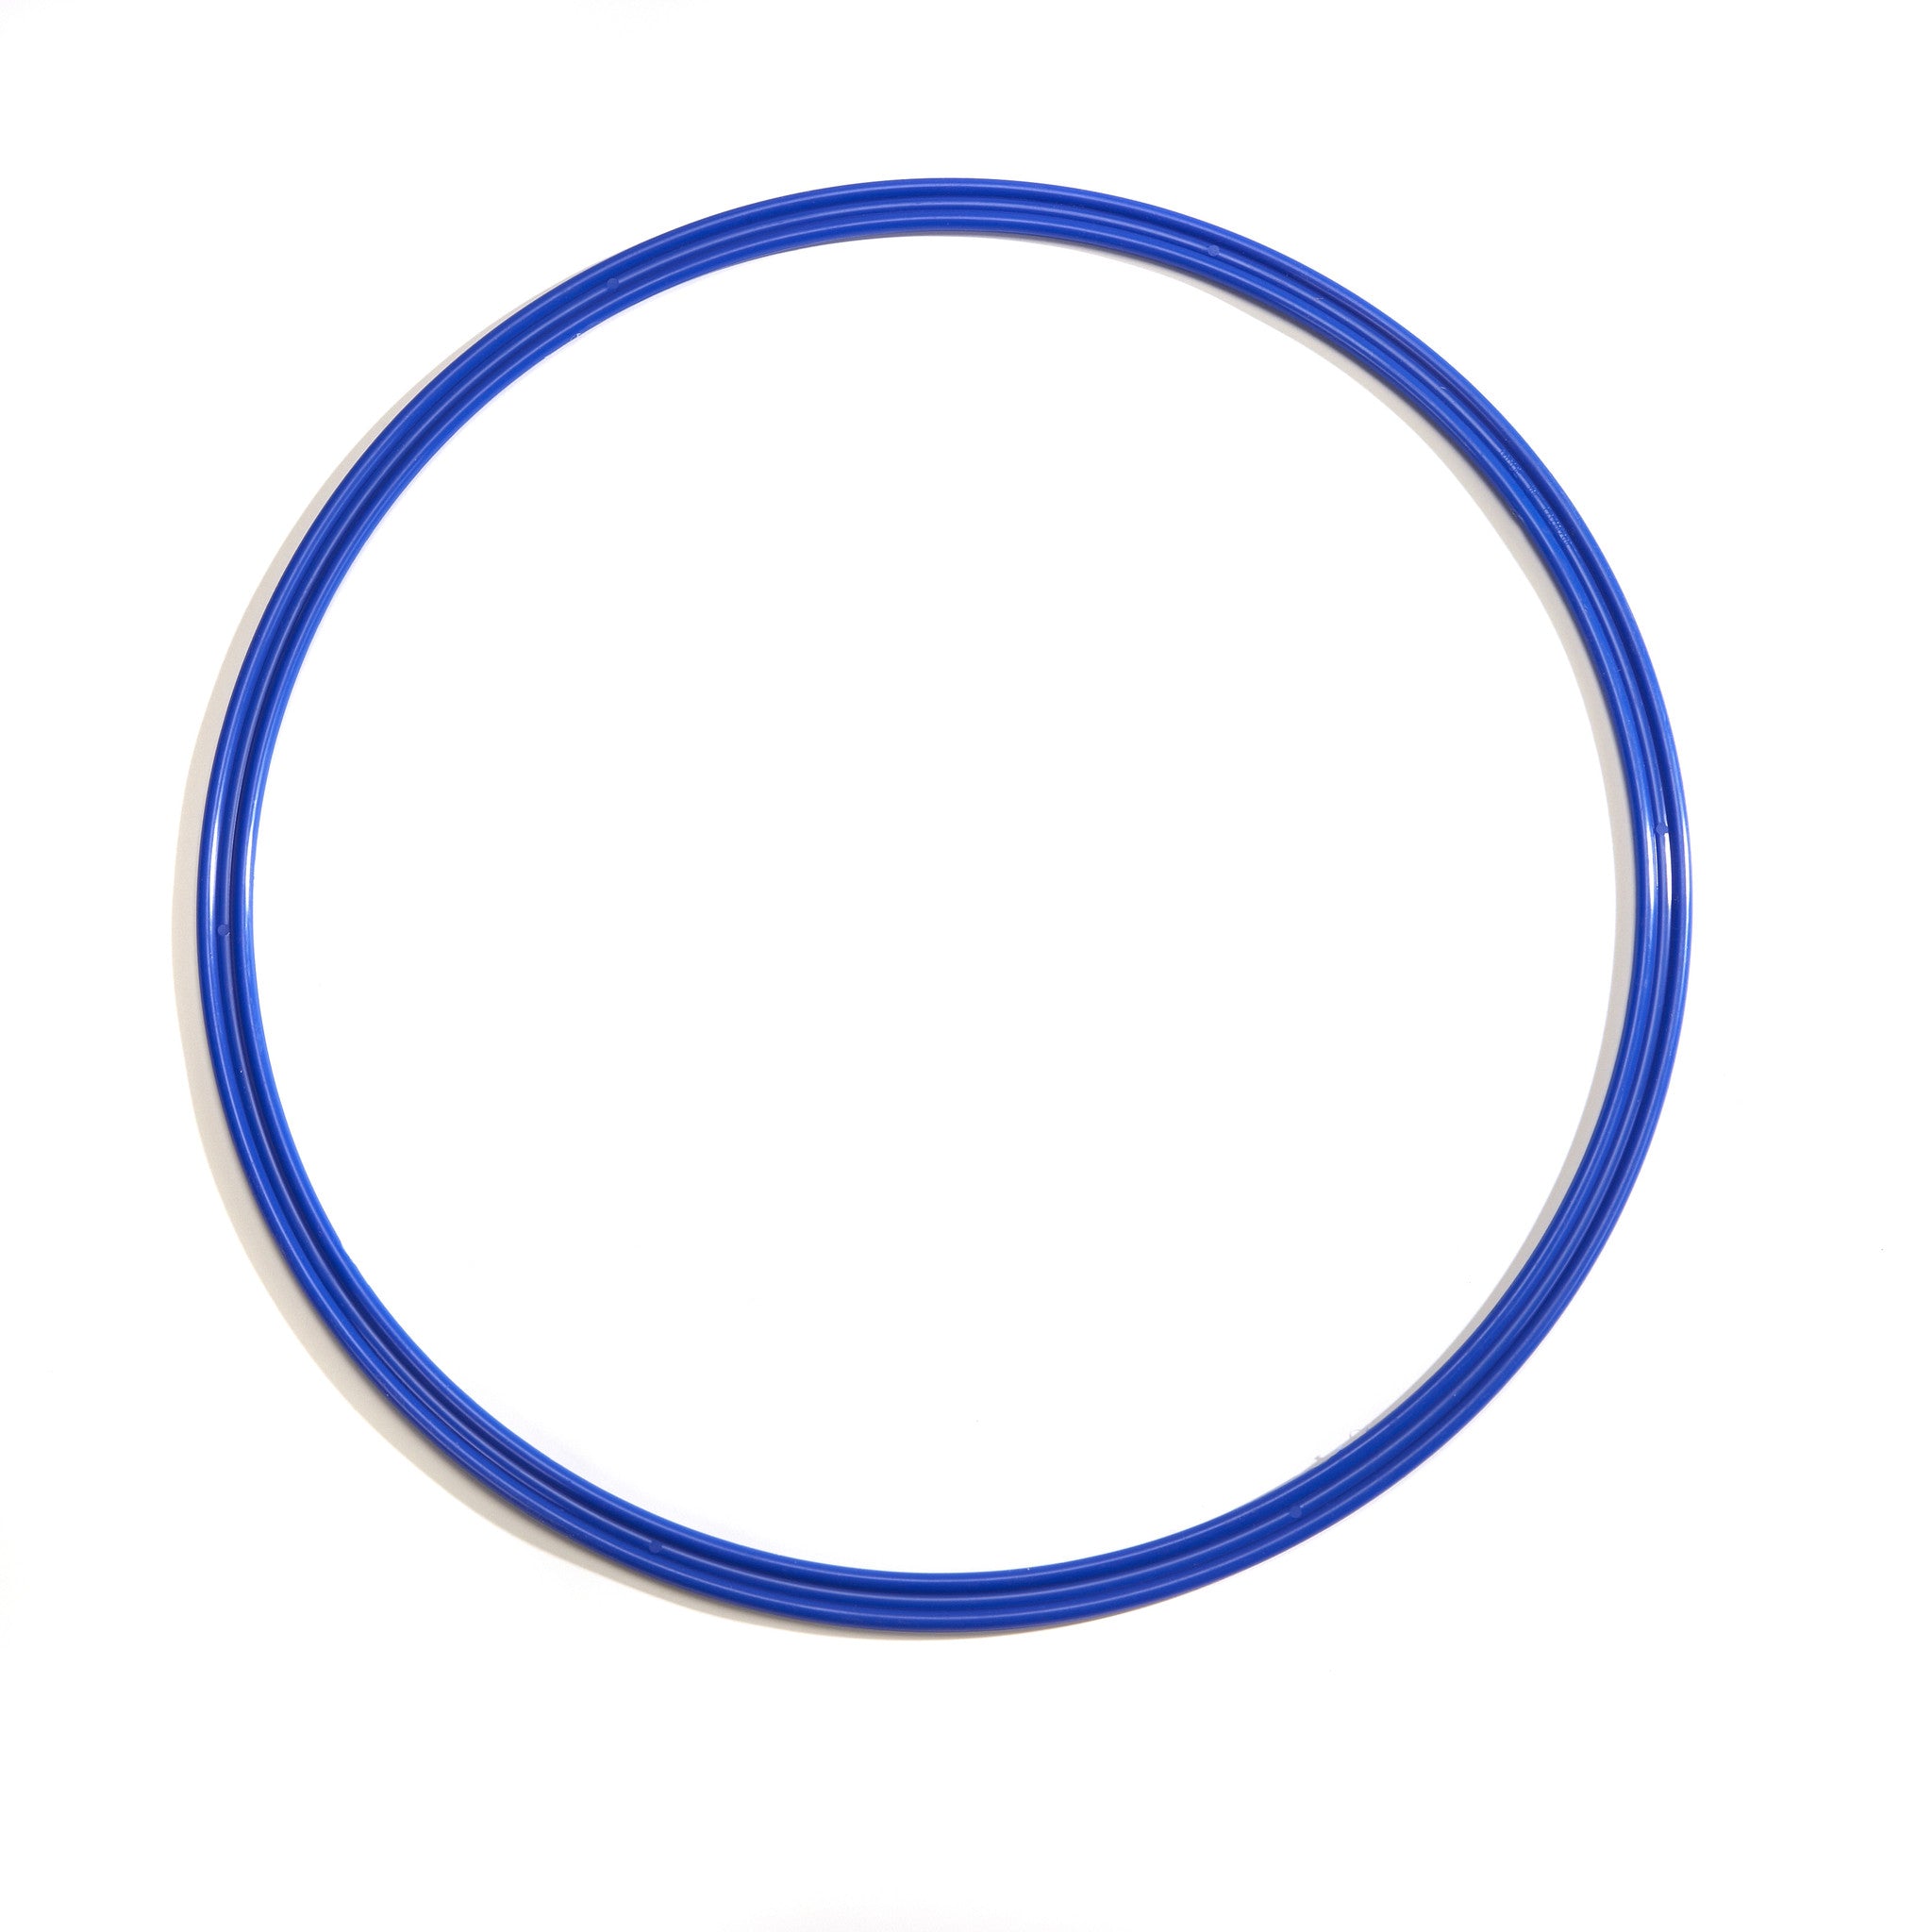 Blue 50cm flat hoop for sports coaching and training.